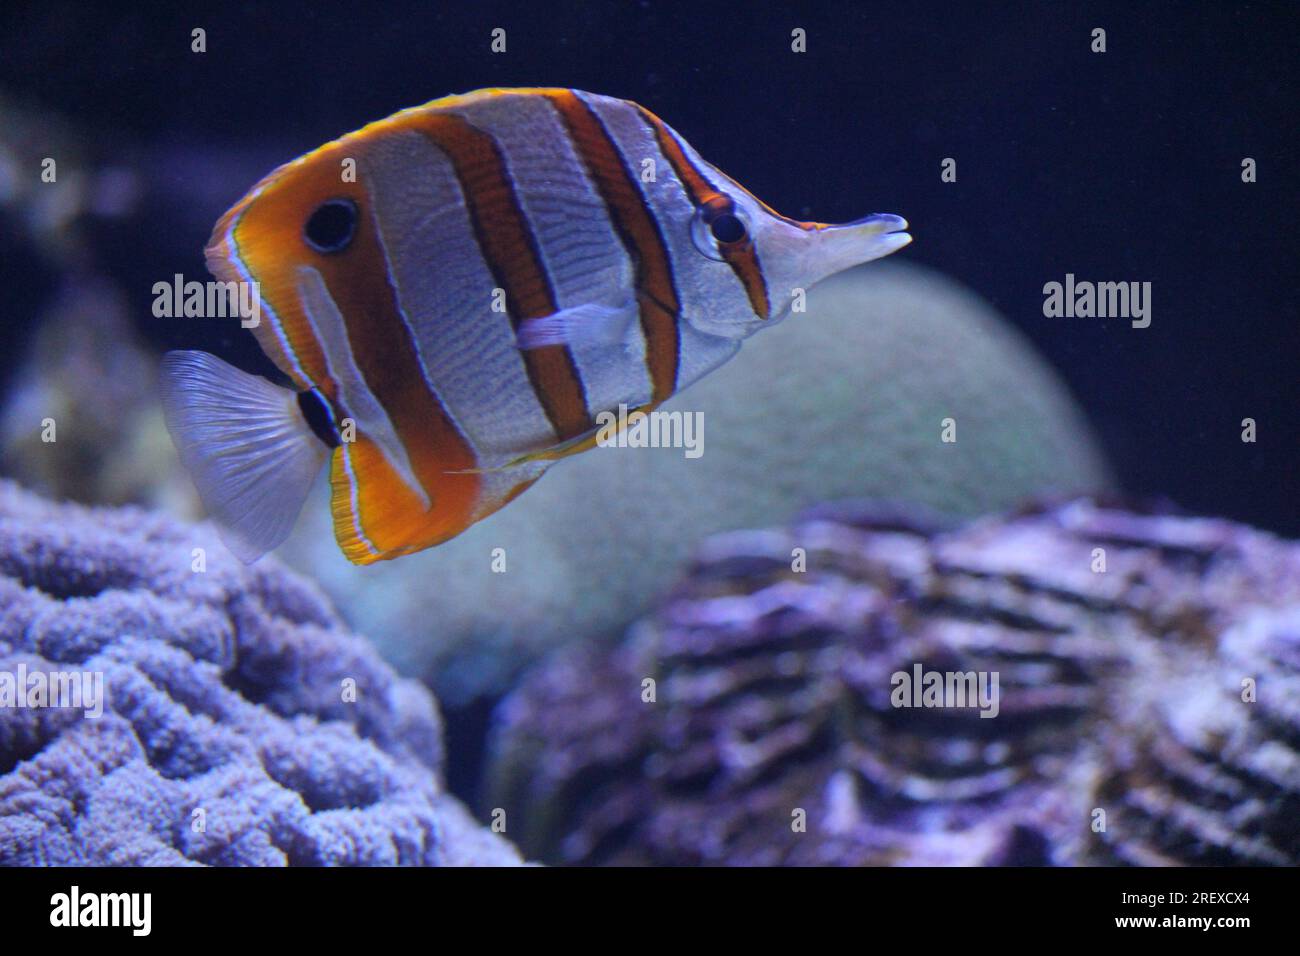 Copperband butterflyfish Stock Photo